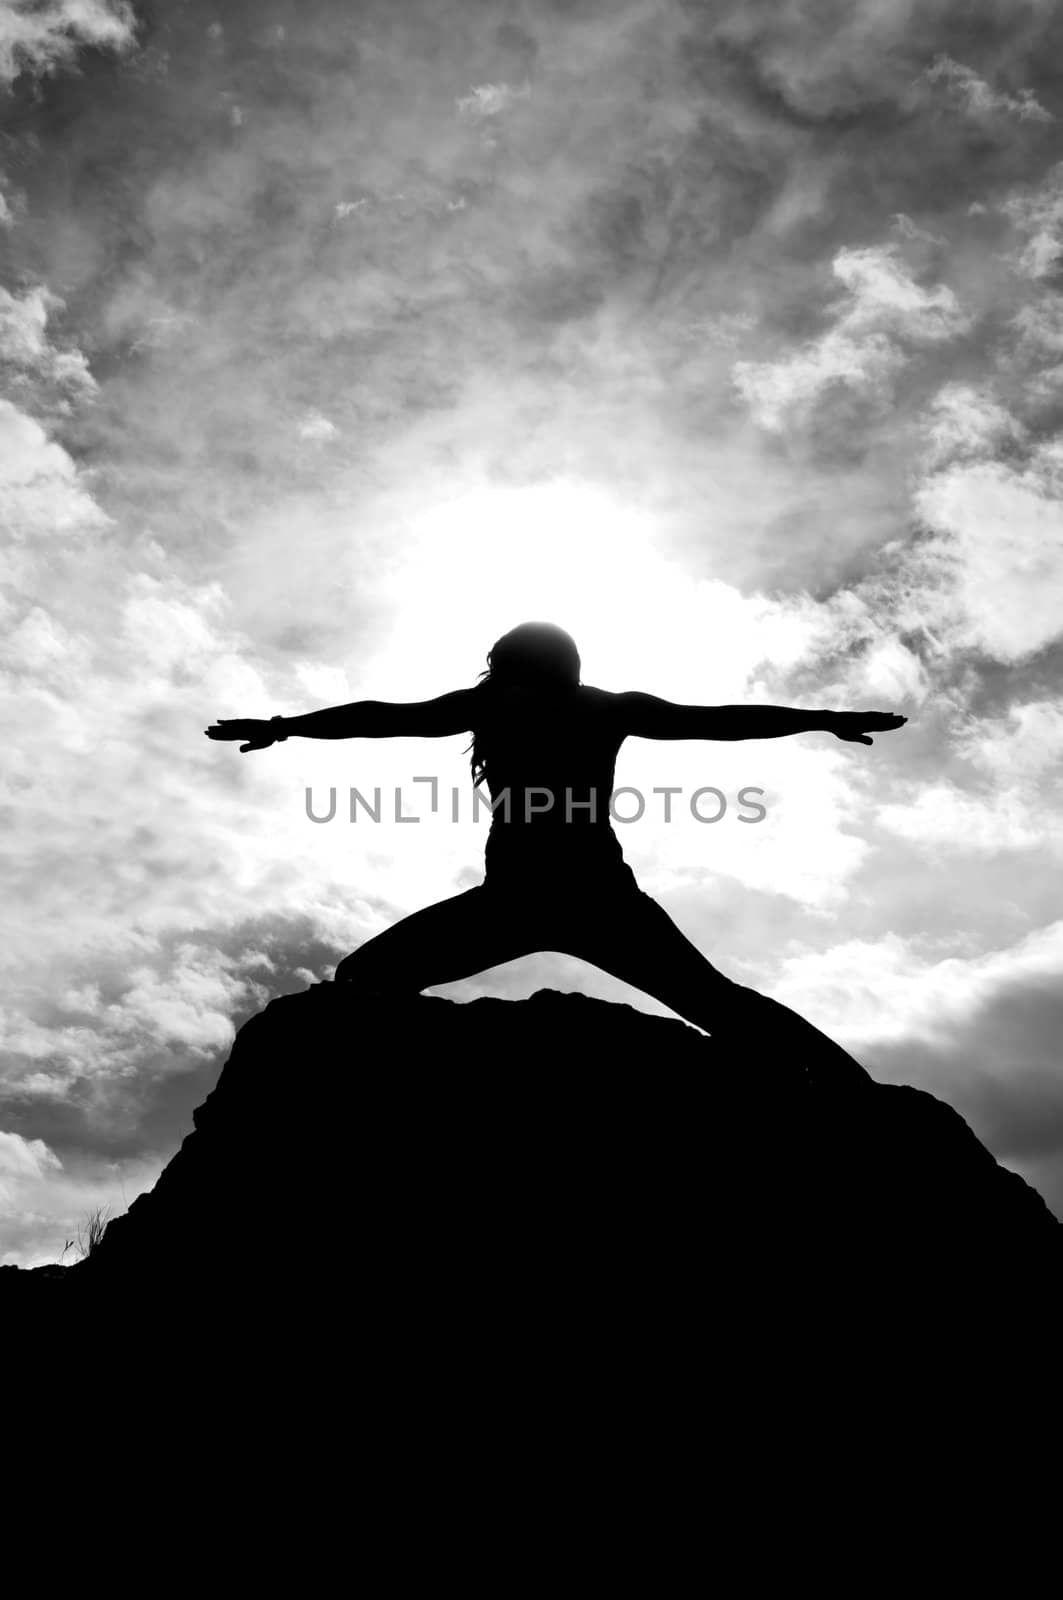 Black and white silhouette of a young attractive girl doing the Warriors pose from yoga on top of a rock with the sky and clouds behind her.